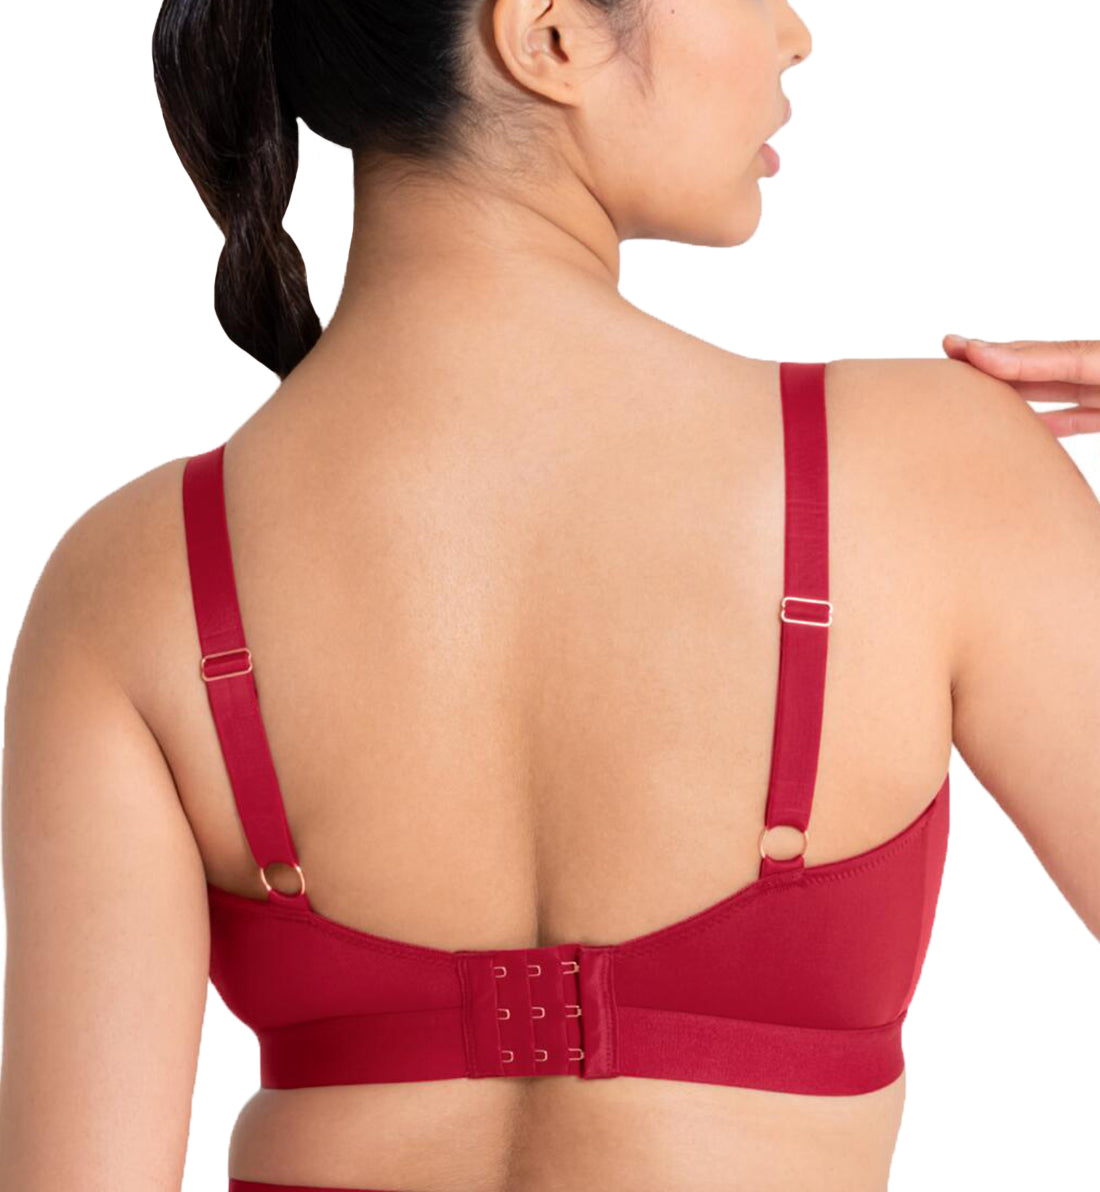 Scantilly by Curvy Kate Indulgence Plunge Bralette (ST010110),Small,Red - Red,Small